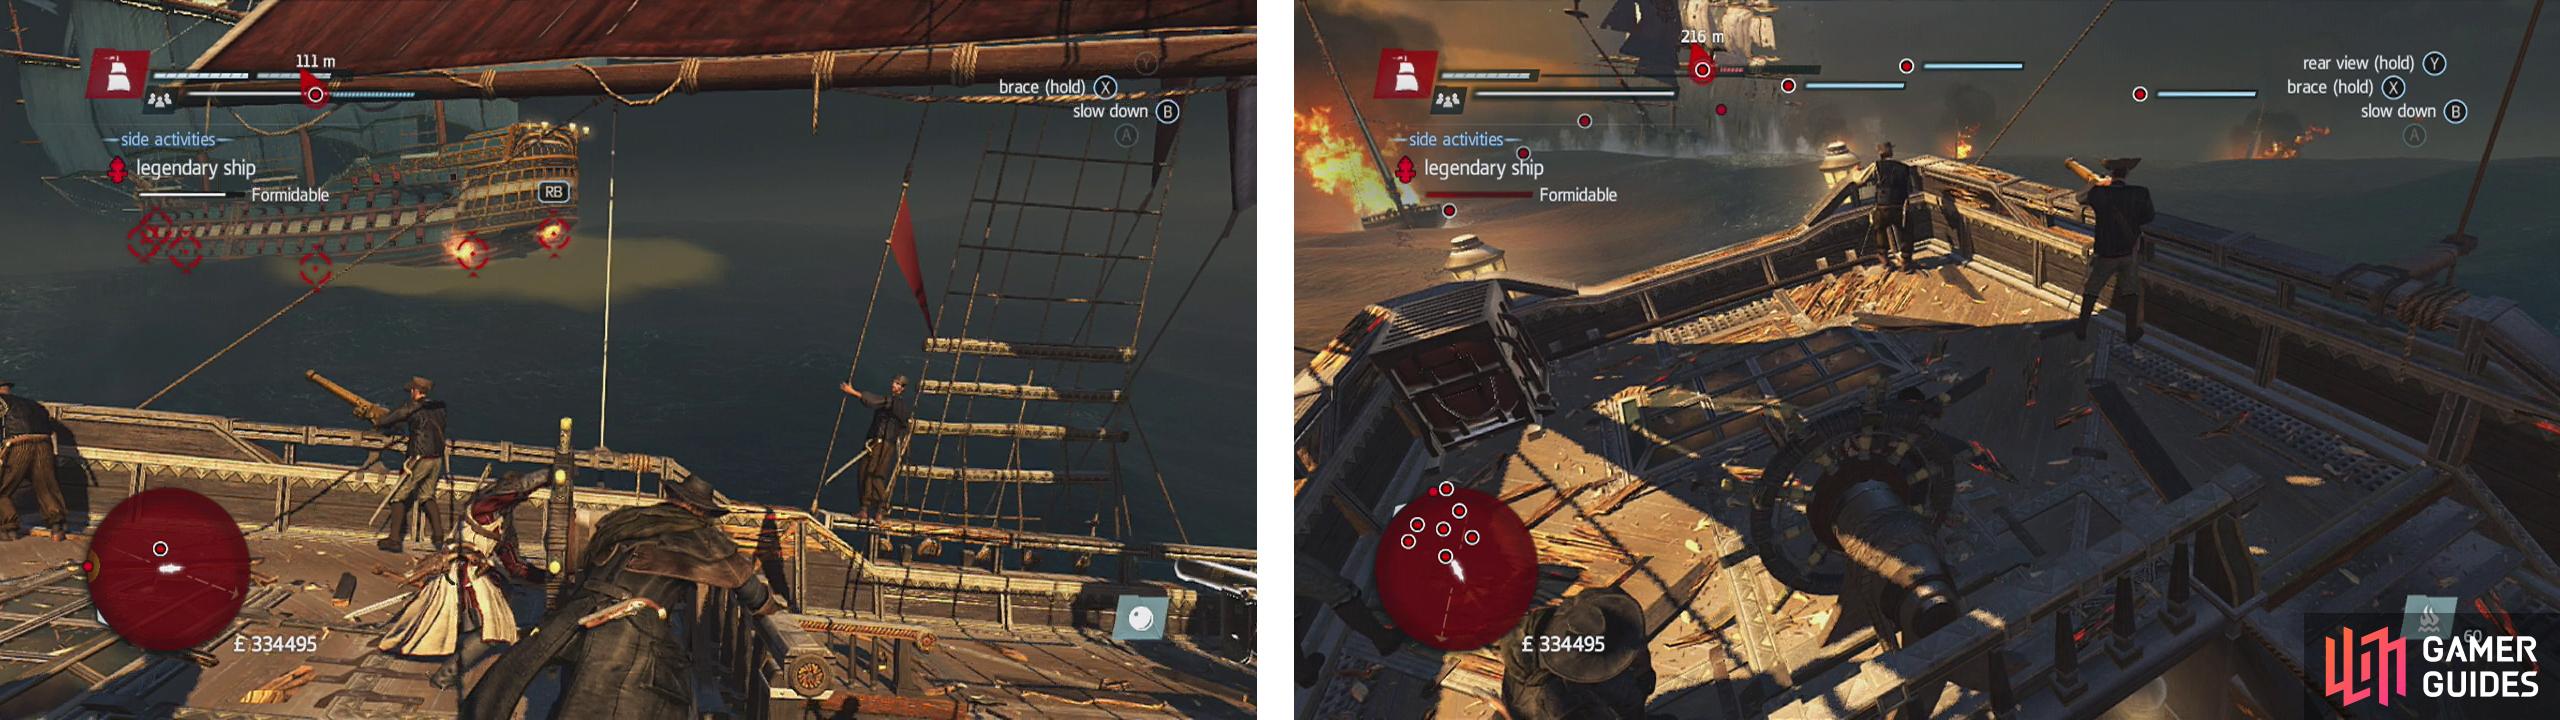 Mortars should be your first choice, but cannons work too (left). Always keep an eye out for and destroy fireships before they get you (right).